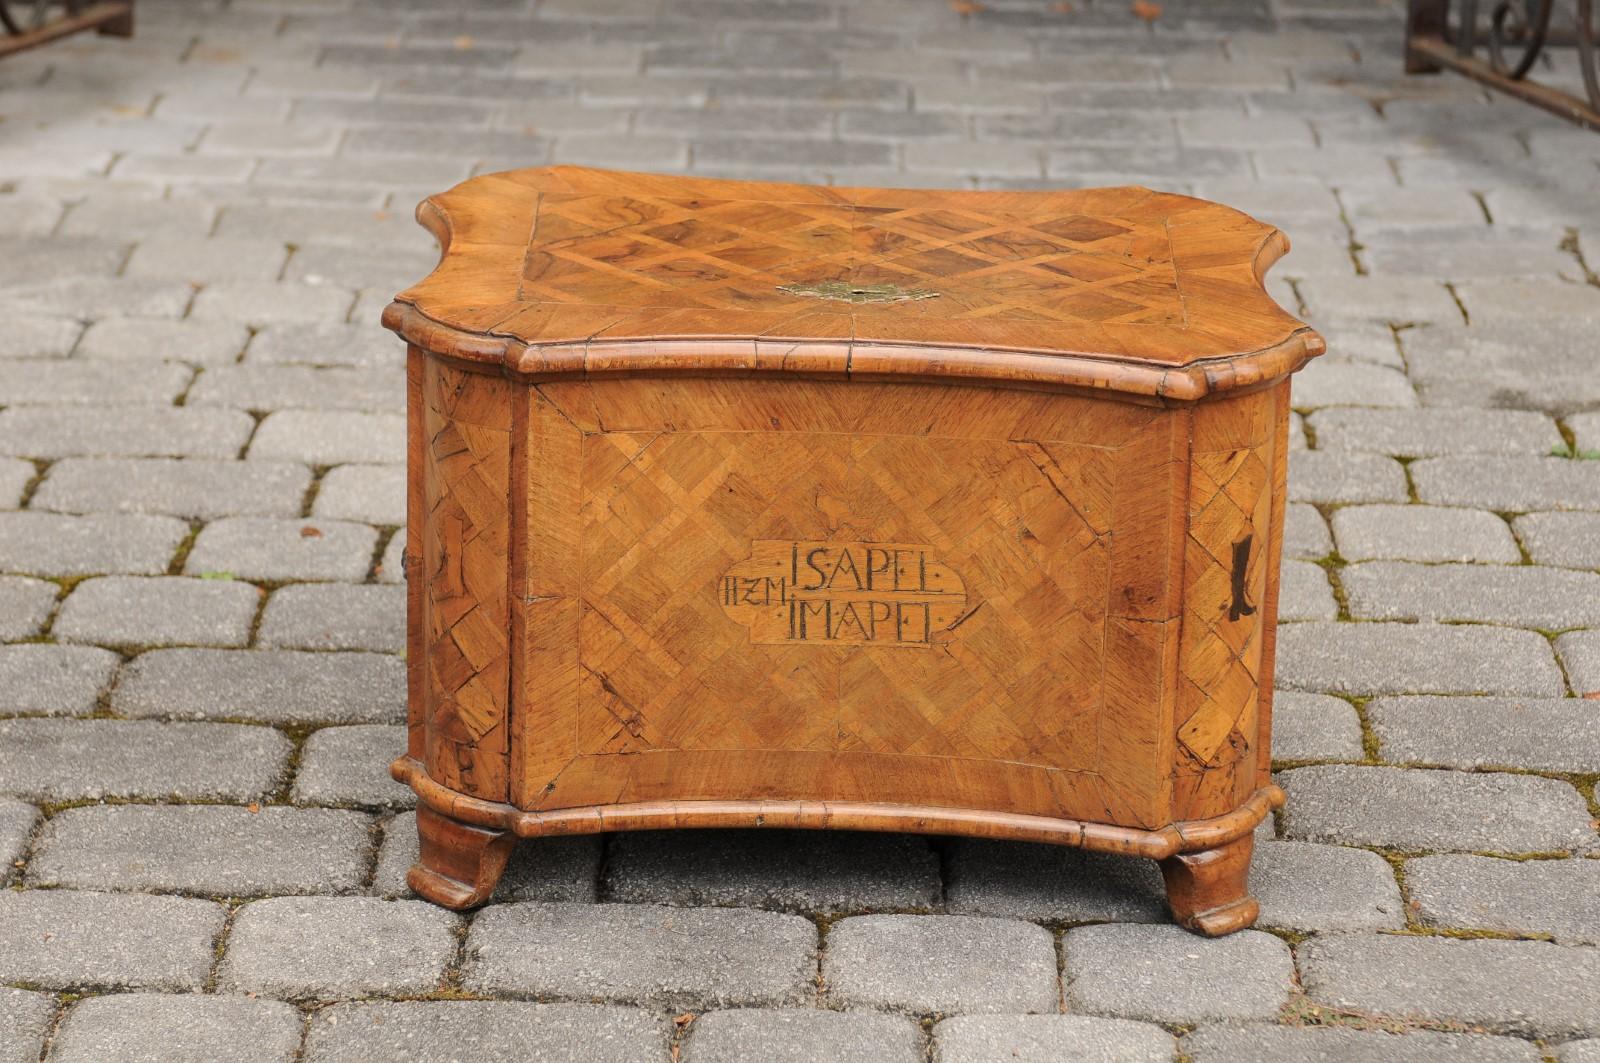 A continental walnut box from the mid-18th century with marquetry décor, inlaid boot motif, inscriptions and date. Born during the Rococo period, this exquisite petite box on feet features a diamond-shaped marquetry present on the lid and side